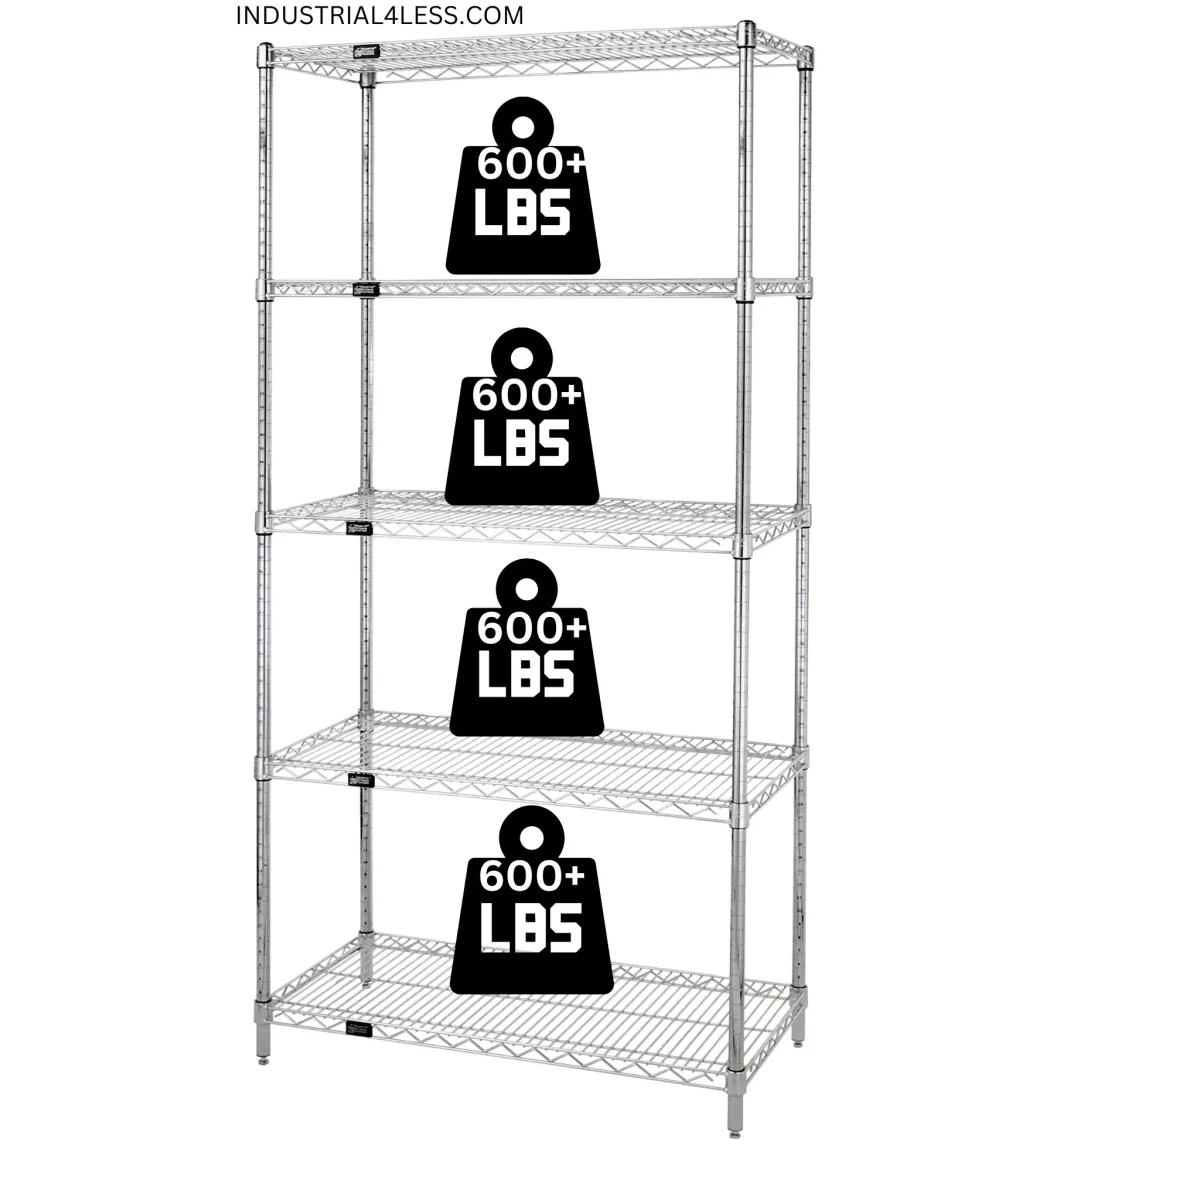 21" x 48" Stainless Steel Wire Shelving Unit - Industrial 4 Less - 21485S-5